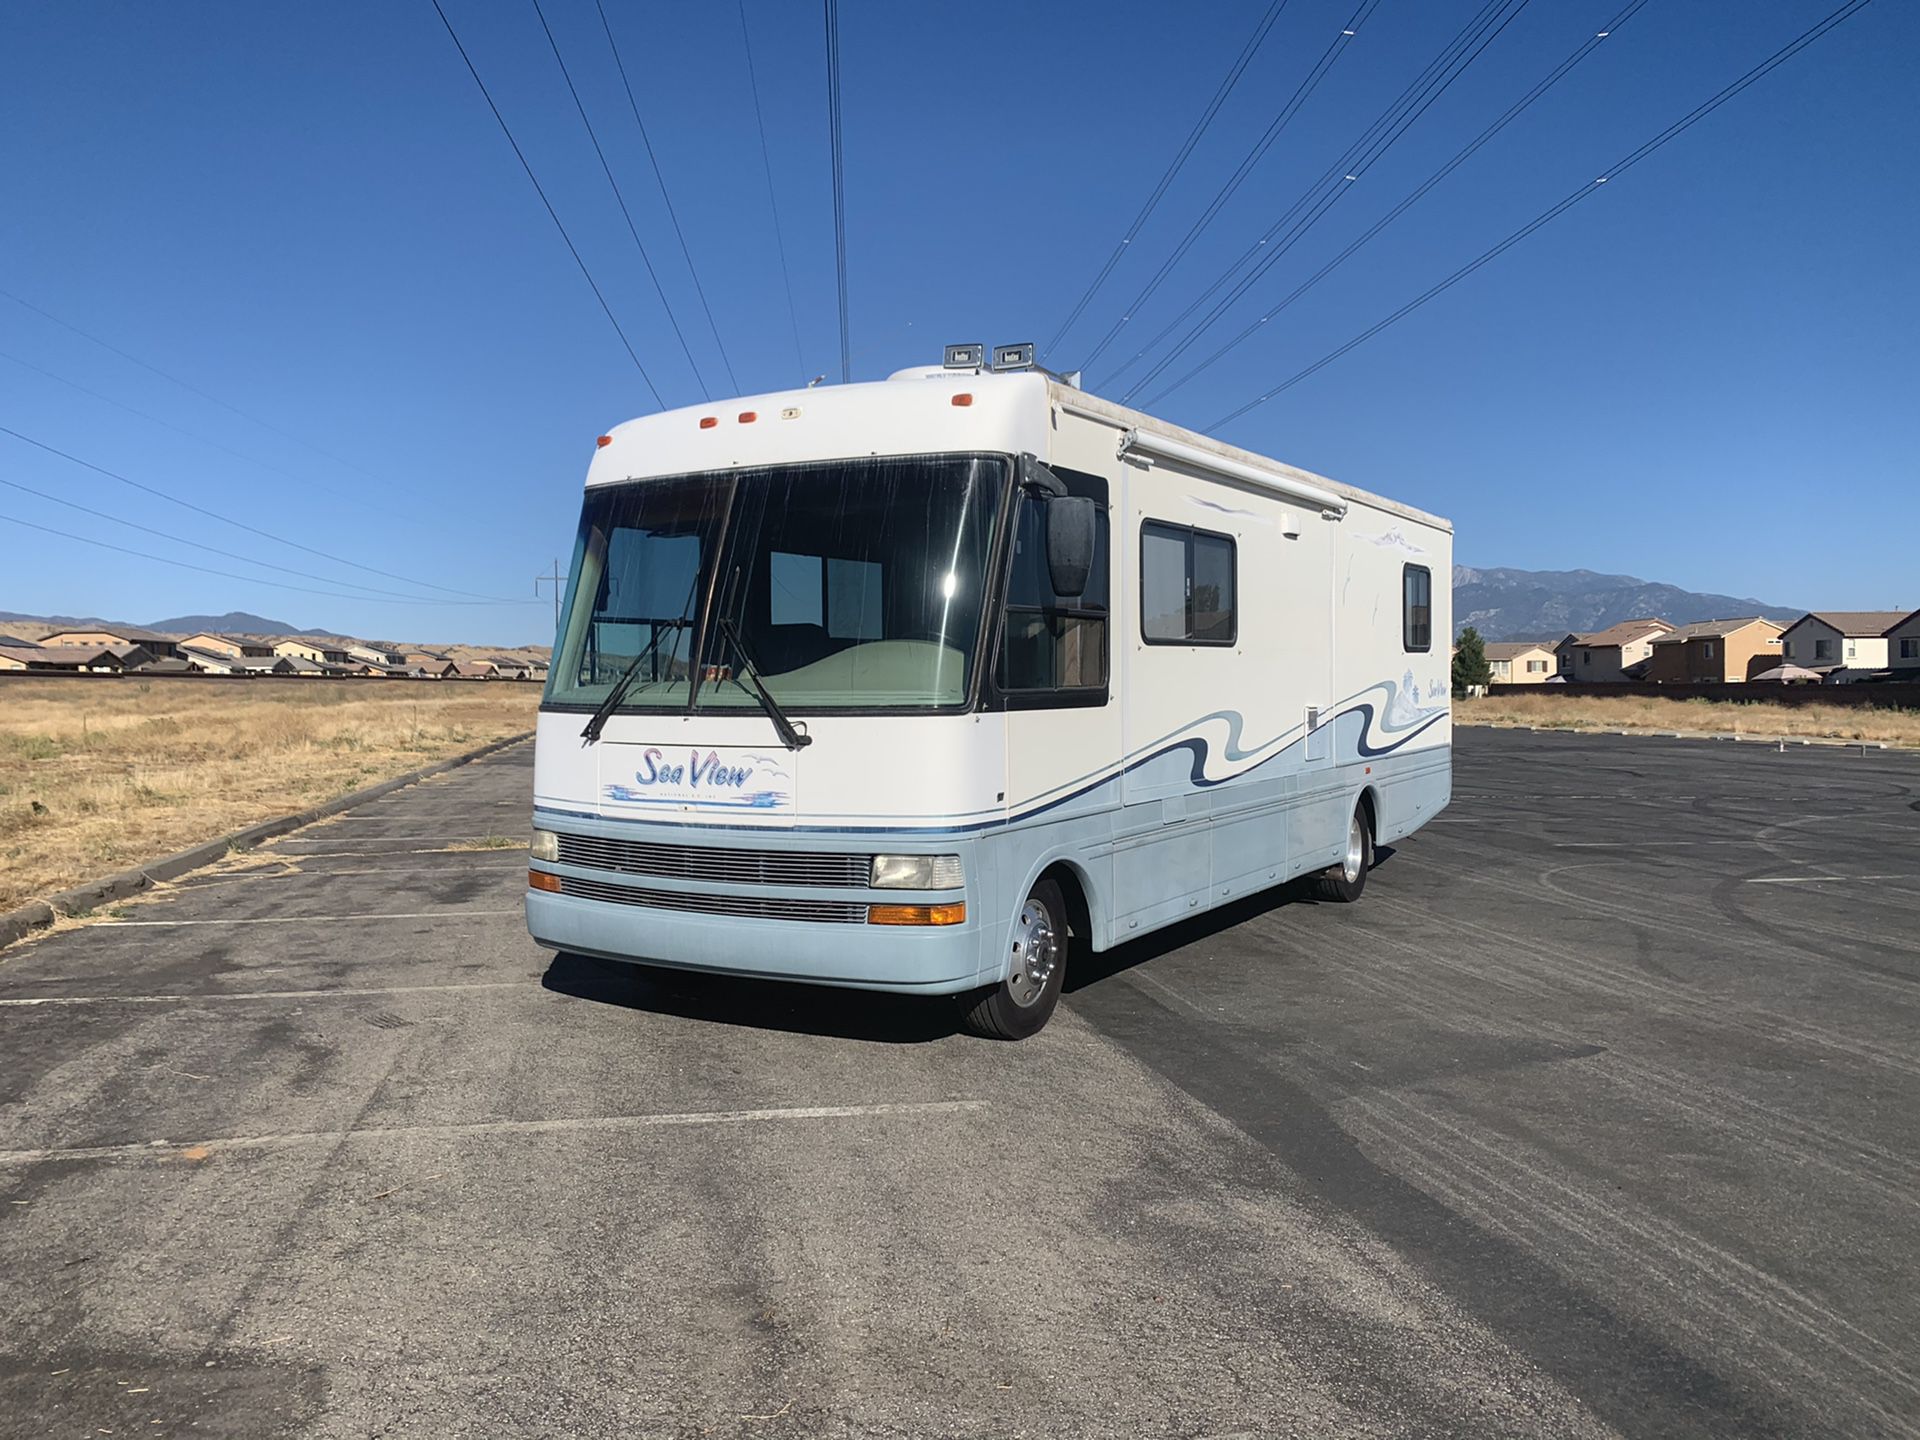 2000 Sea View motorhome by National RV (Fully Loaded Set up)